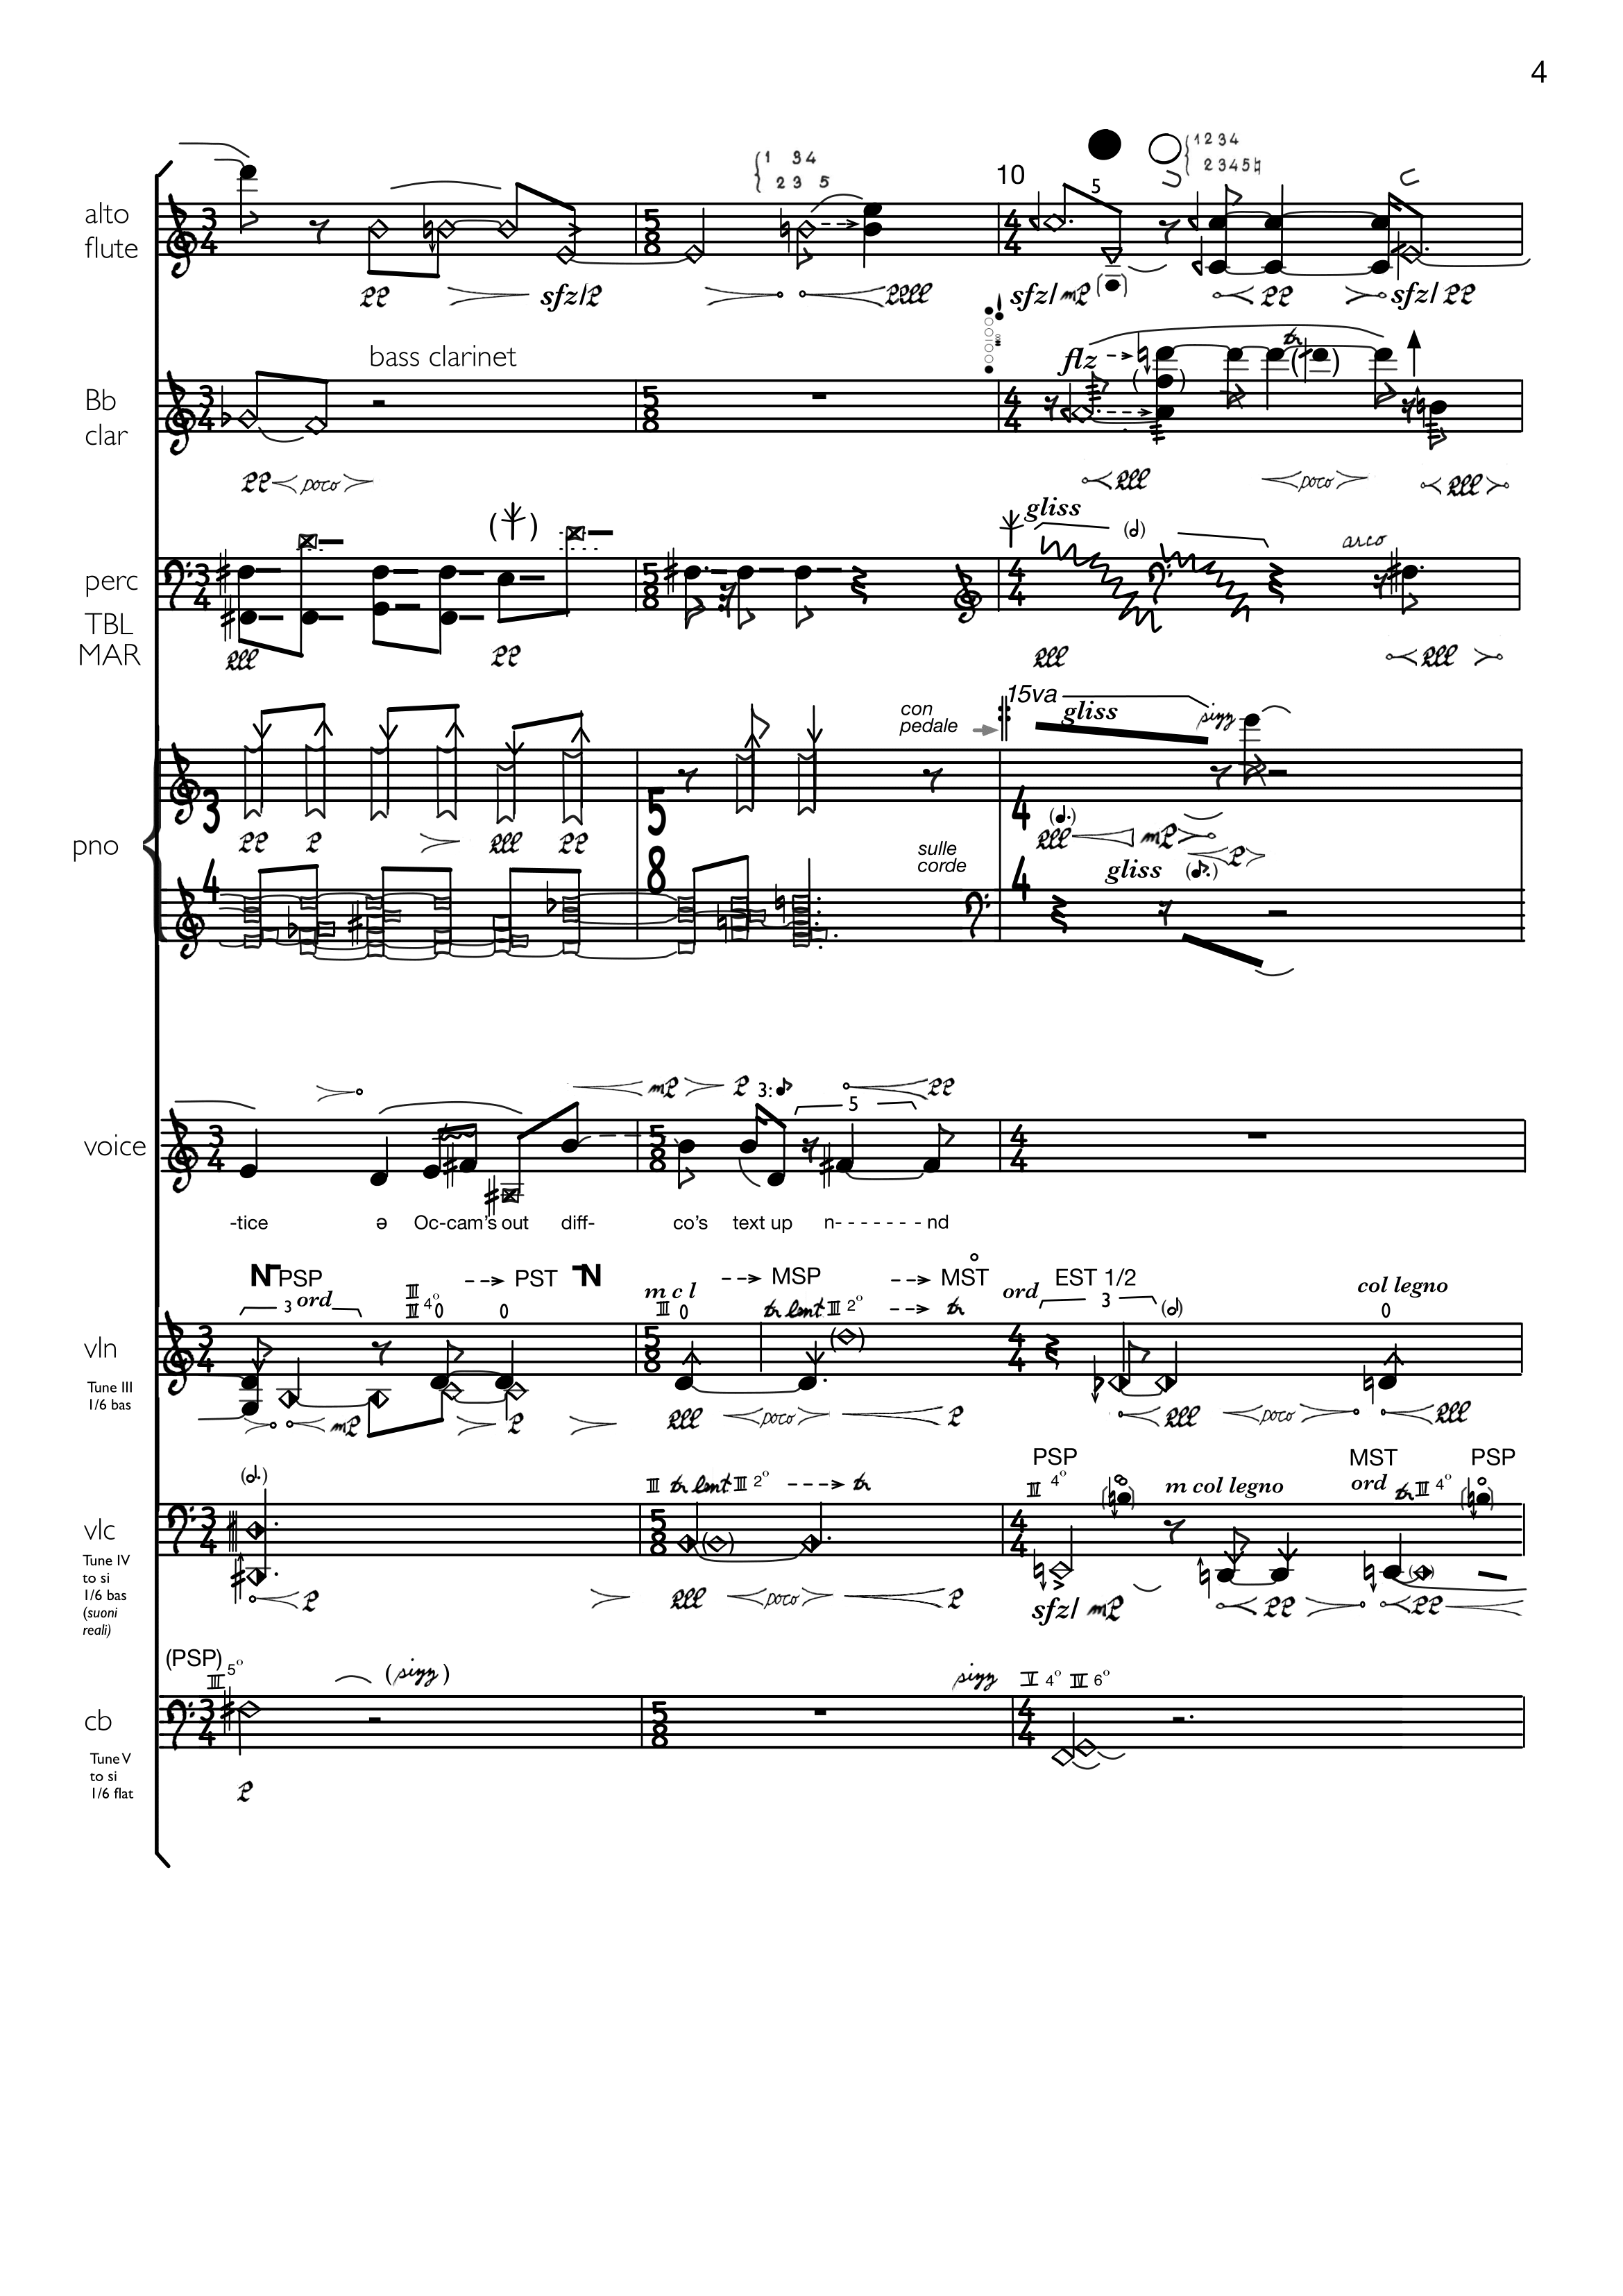 _AdasSong-score-2021version-04.png